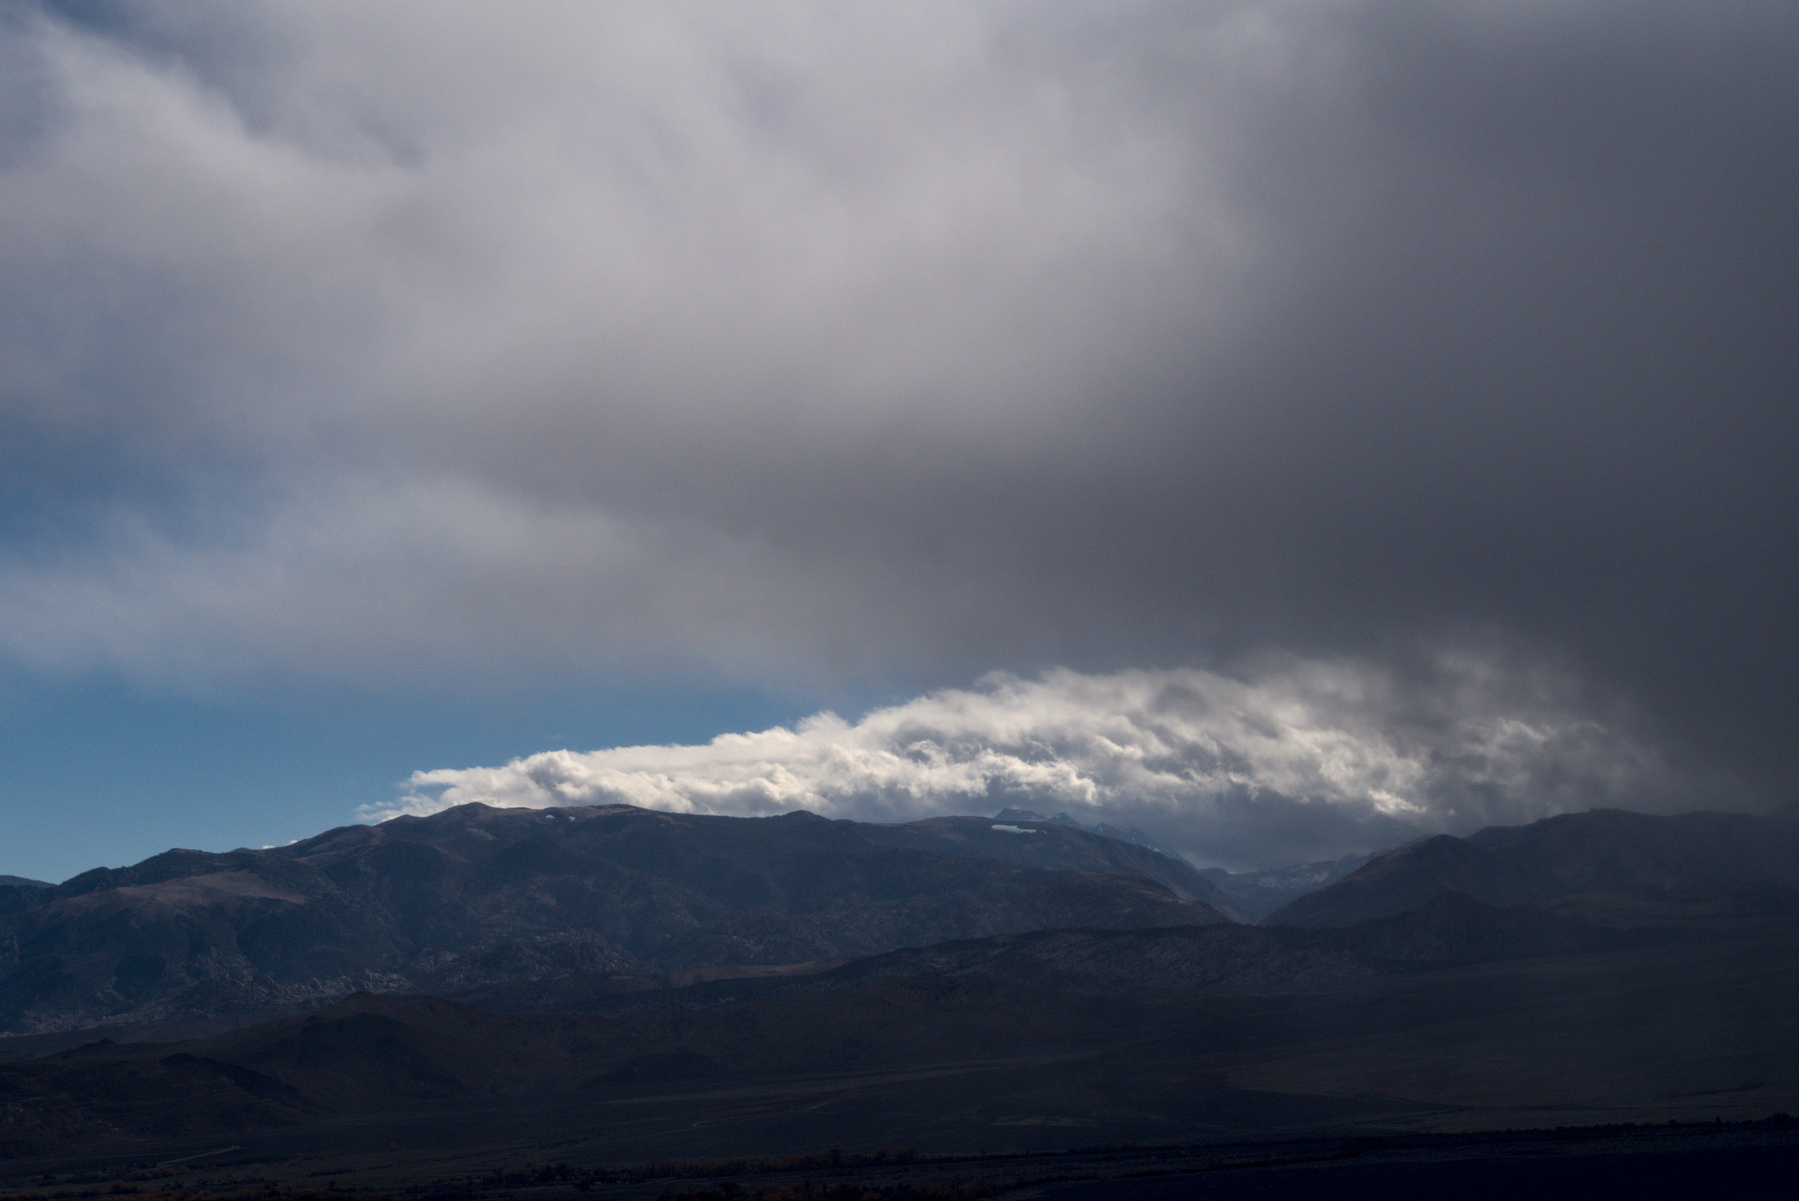 A narrow band of puffy white clouds and blue sky can be seen through a gap over some mountains and under storm clouds.